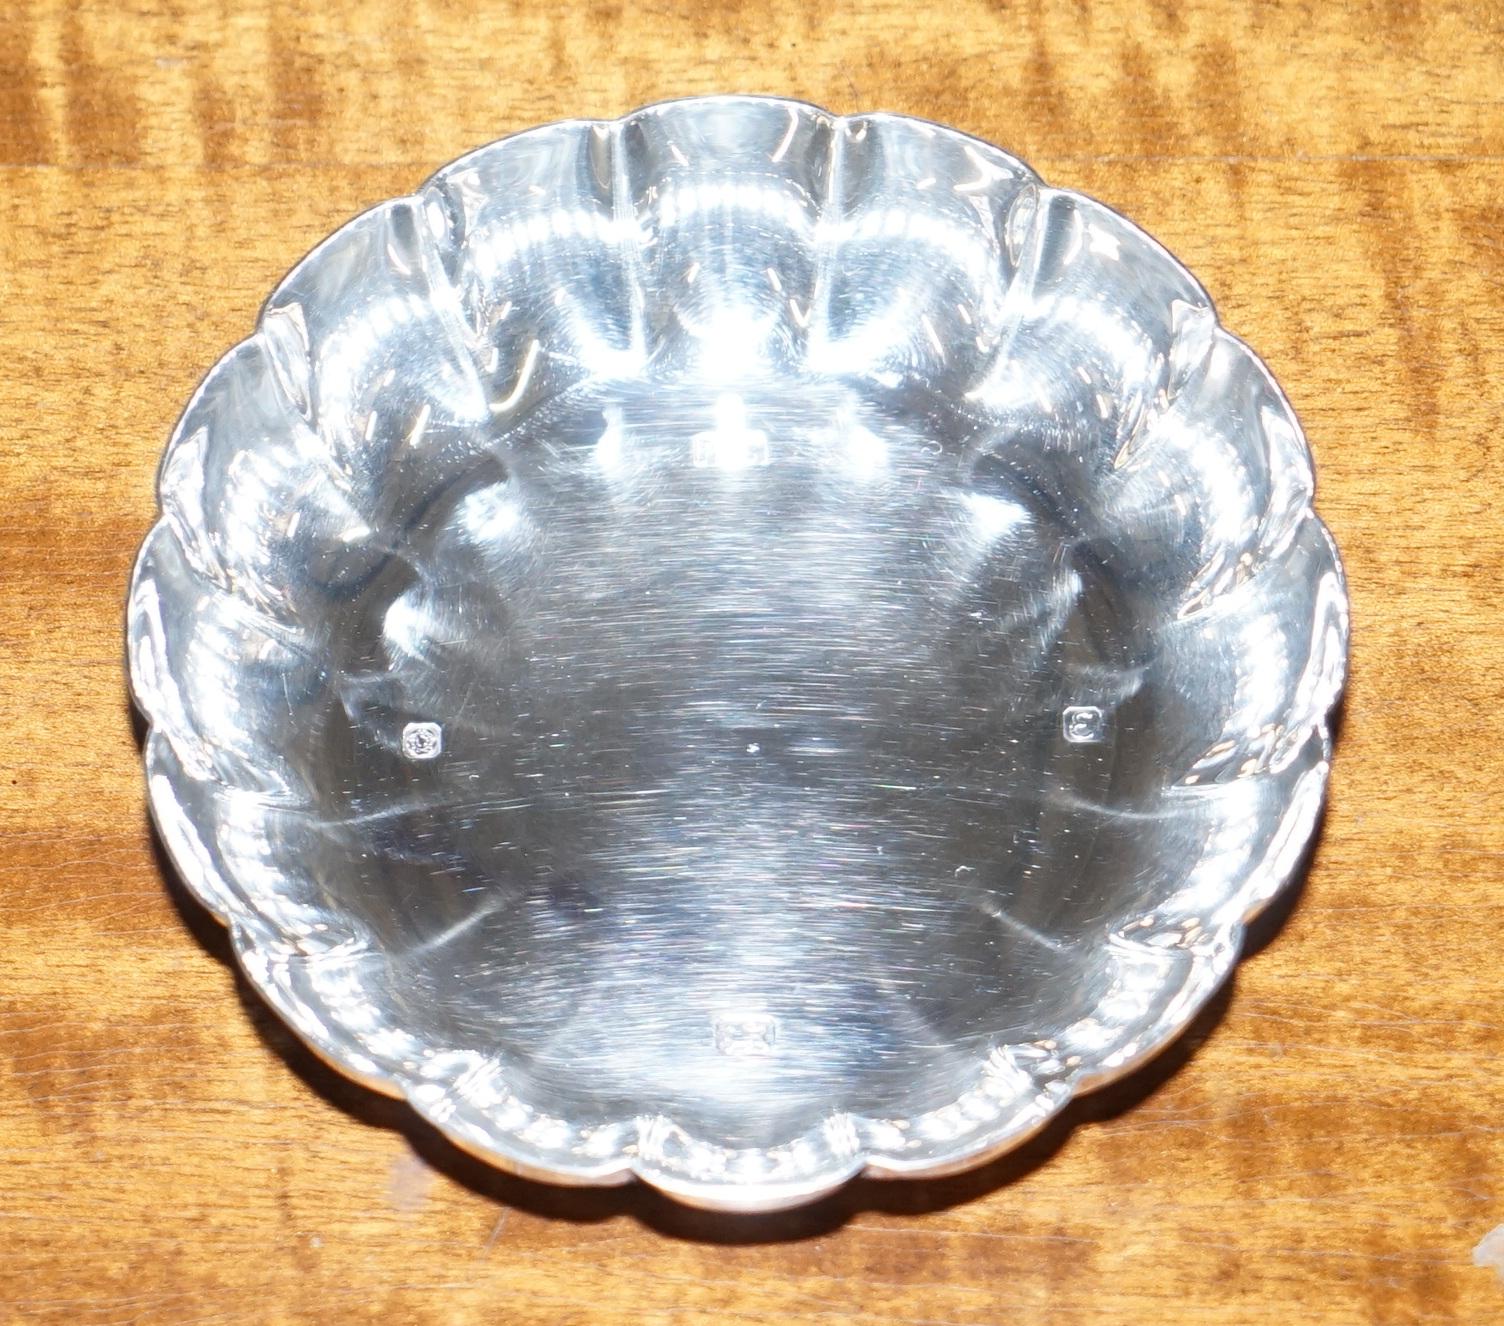 We are delighted to offer for auction this very rare solid sterling silver Sheffiled made 1979 dated strawberry serving bowl

A highly collectable exceptionally rare and extremely well made bowl. This is solid sterling silver, I have a much larger